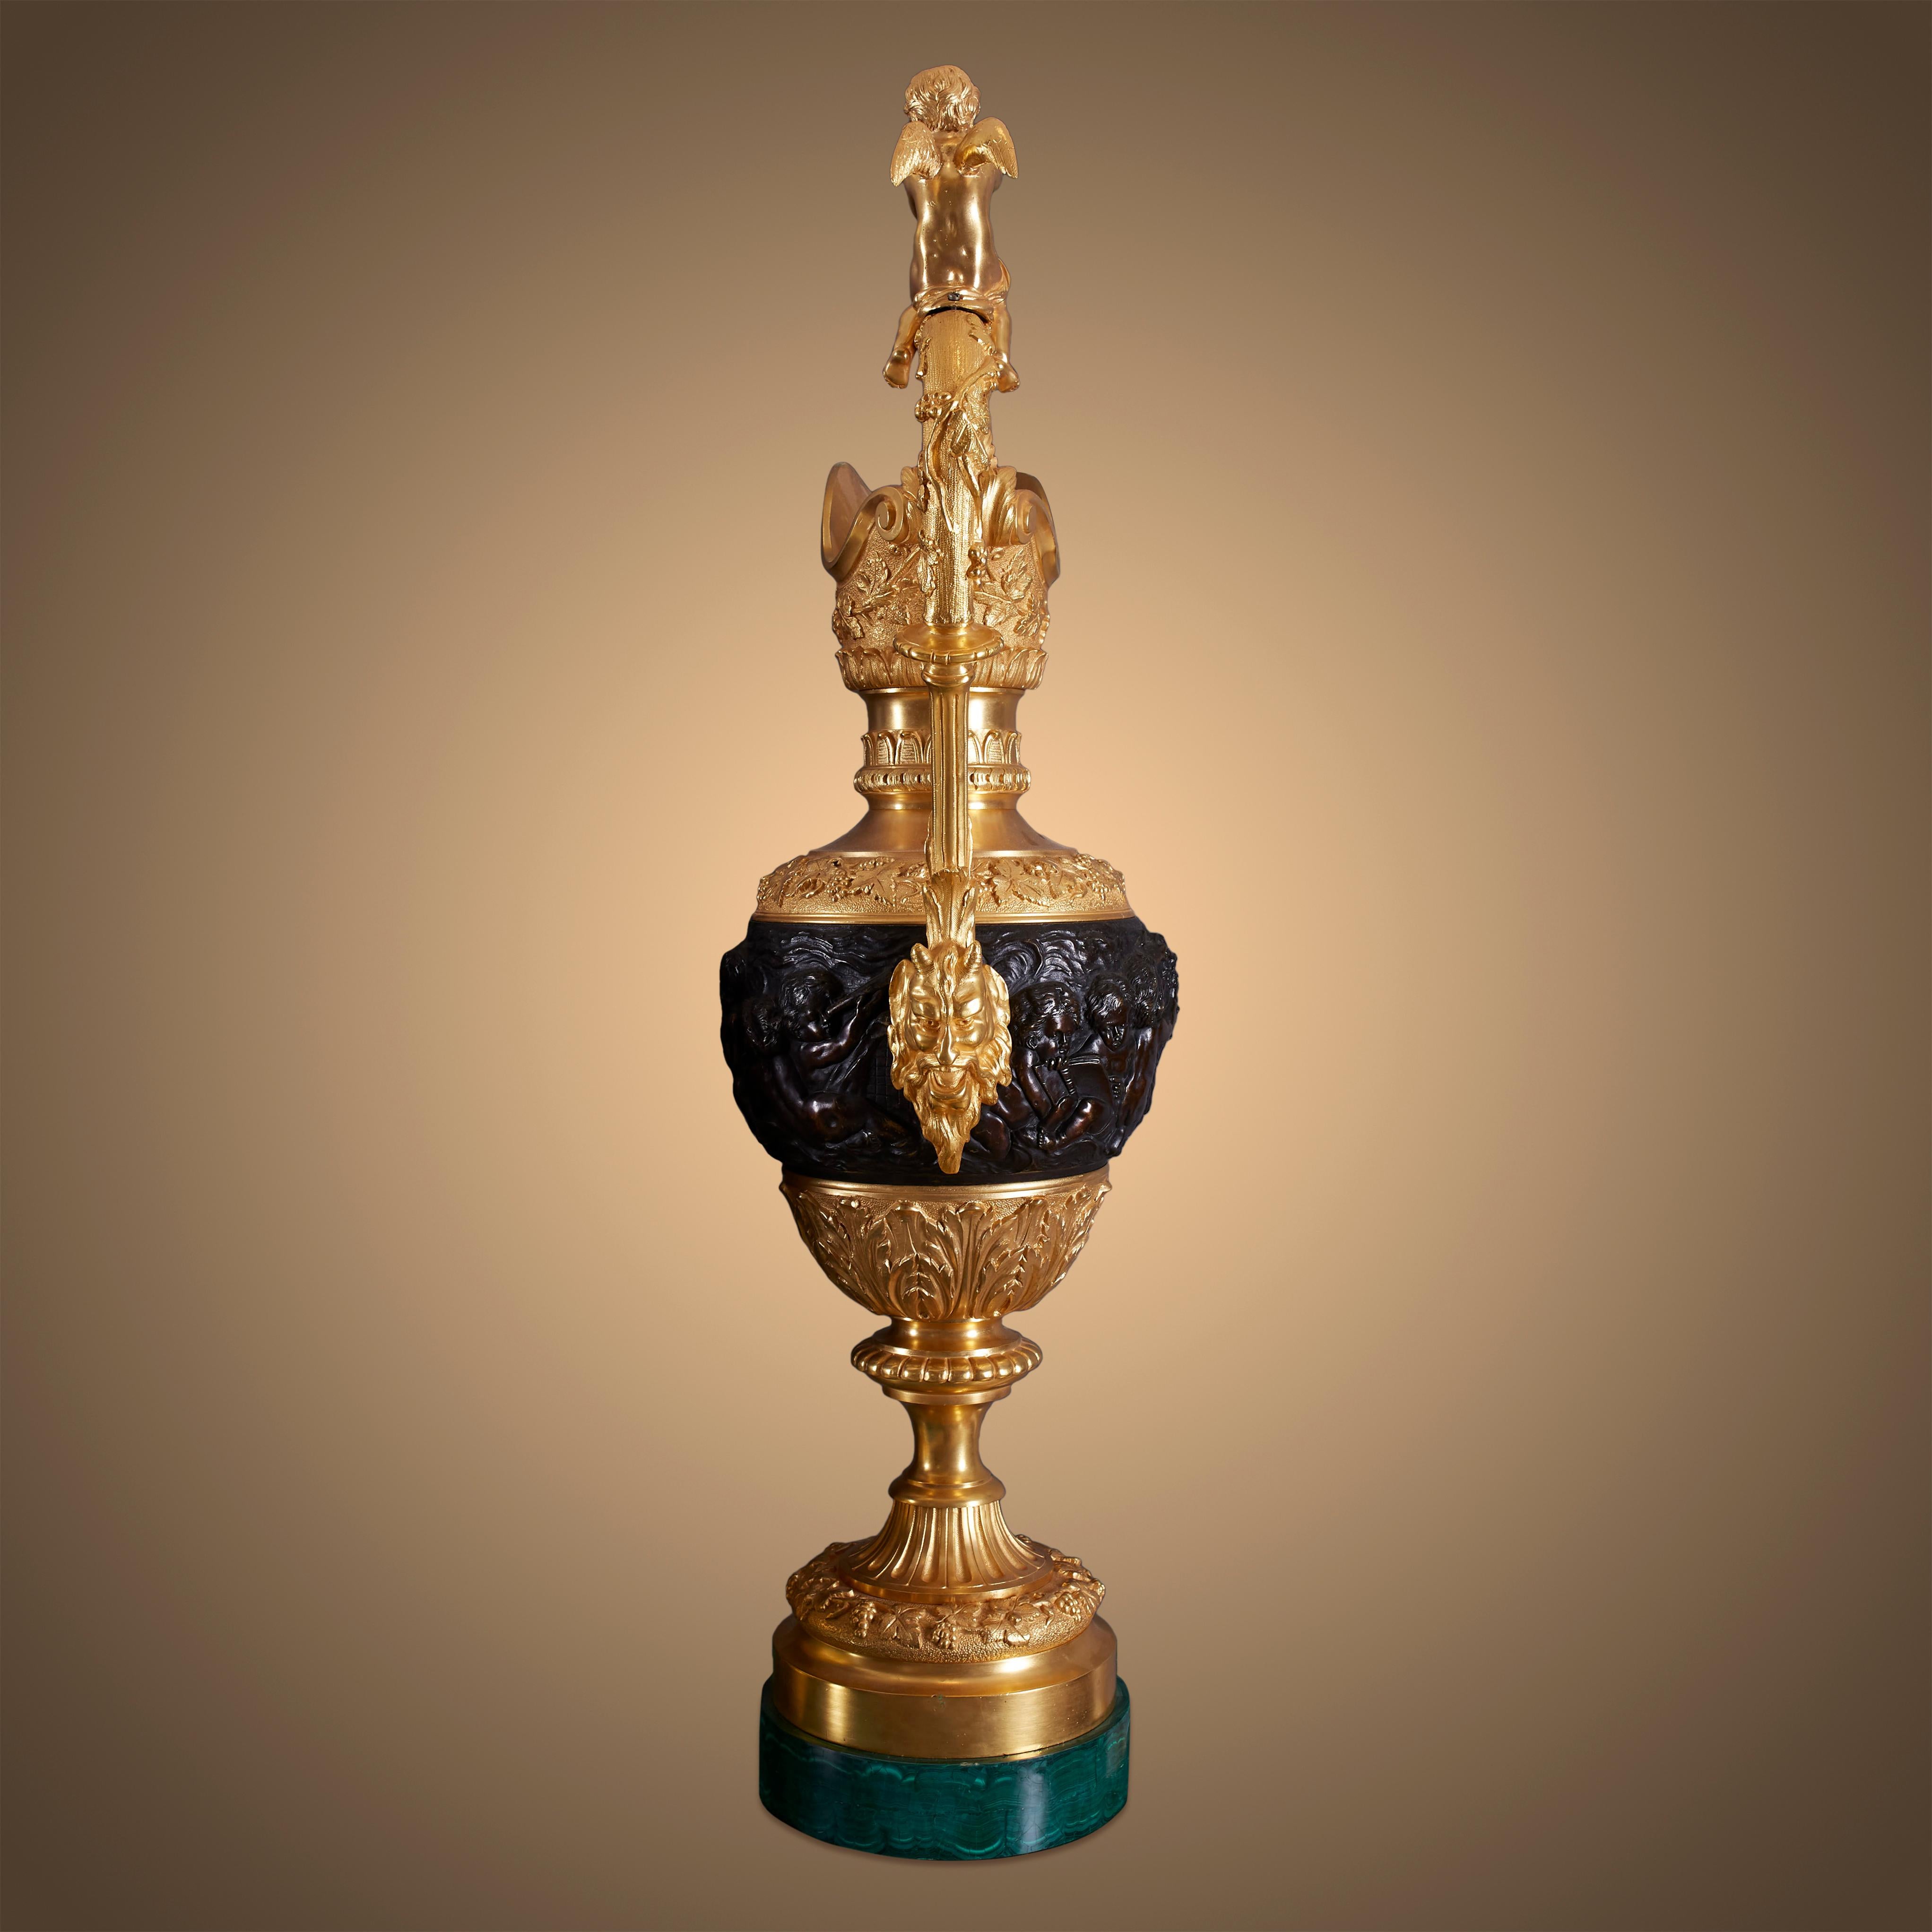 These decorative water vases are a complemetary pices to the ormolu. The water vases are decorated with angels who are surrounding the competition that takes place on the mantel clock. The two vases are designed with delicate curves, adorned with